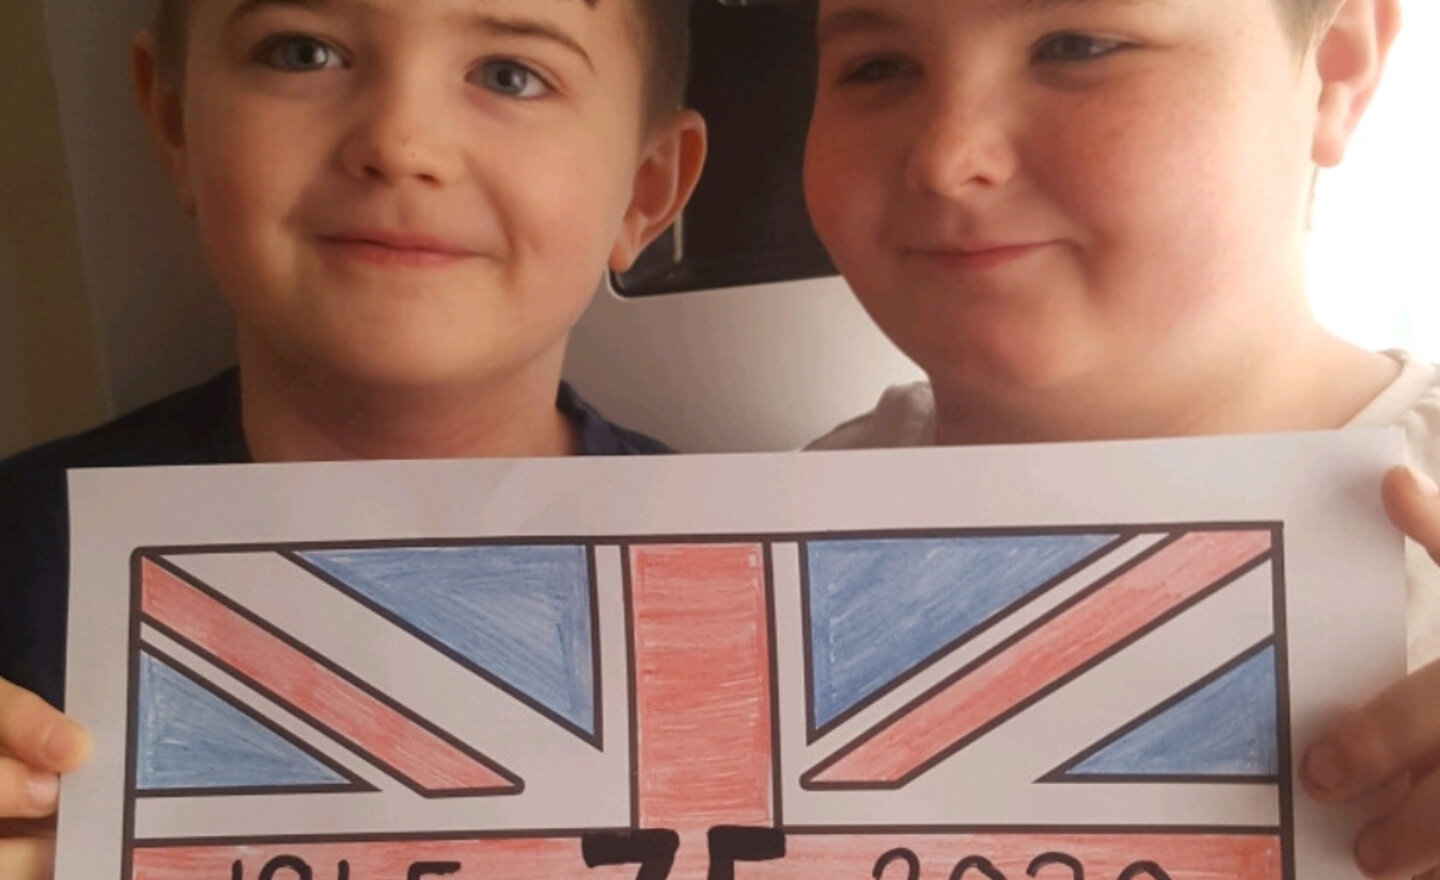 Image of Home learning Week 3: Celebrating the 75th VE Day